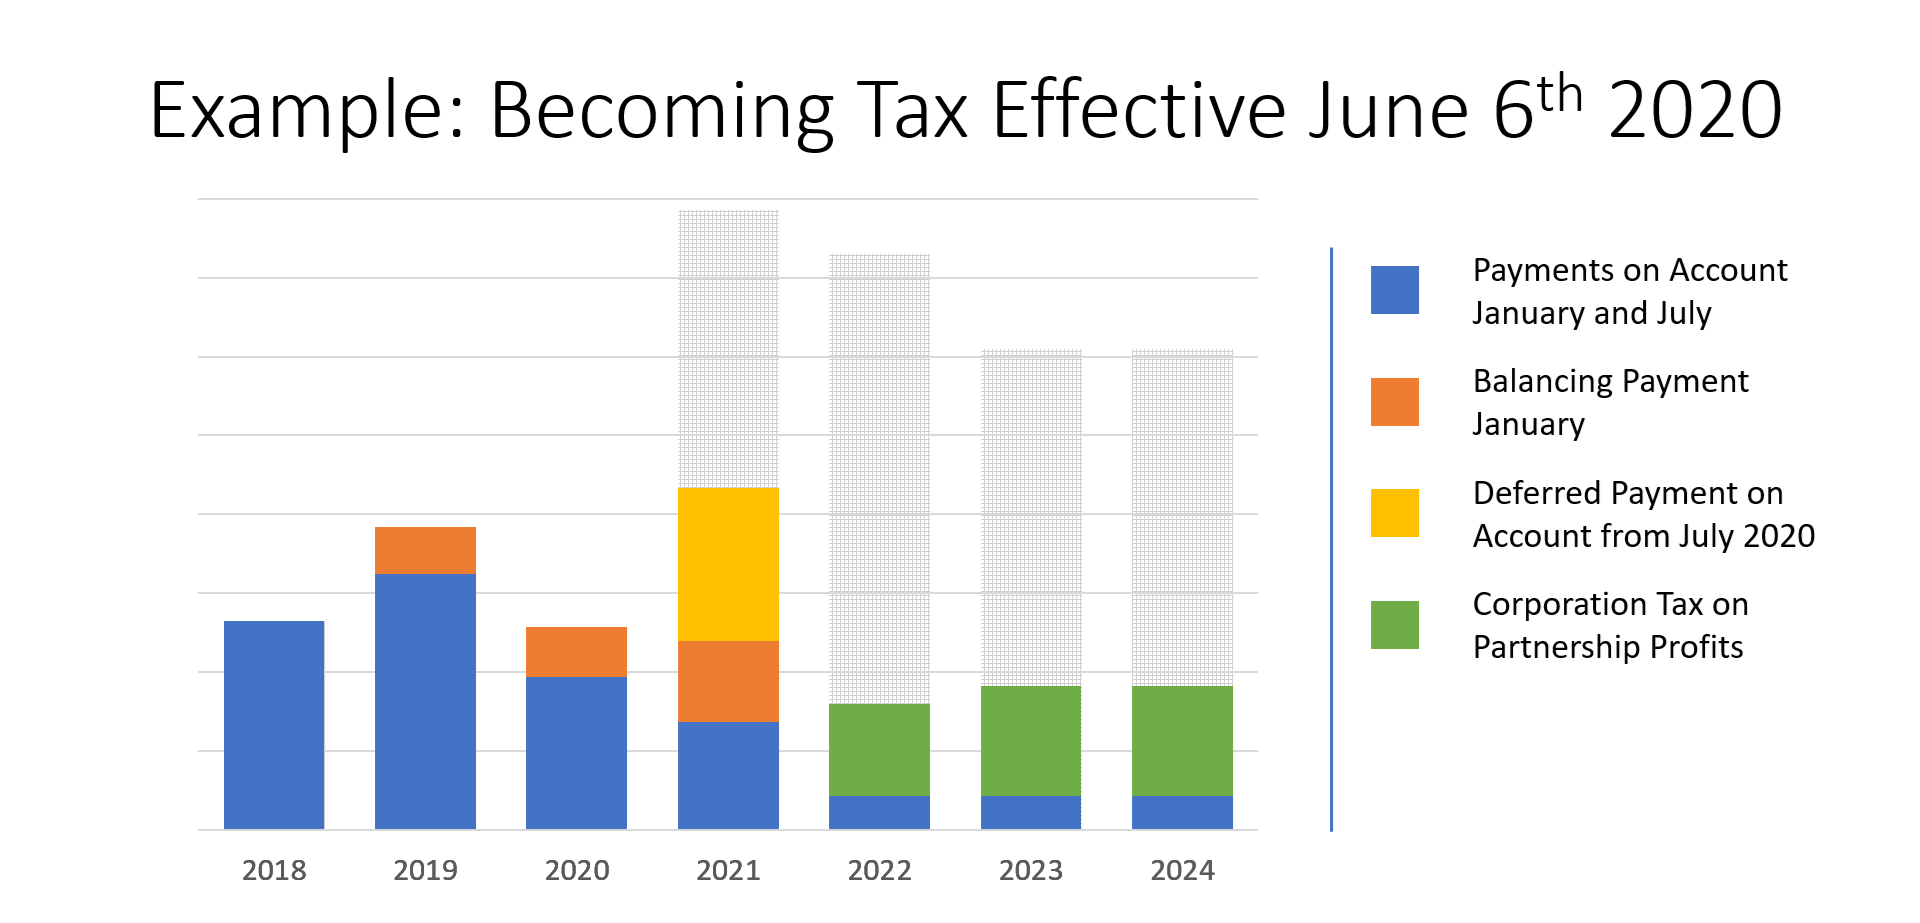 Becoming Tax Effective June 6th 2020